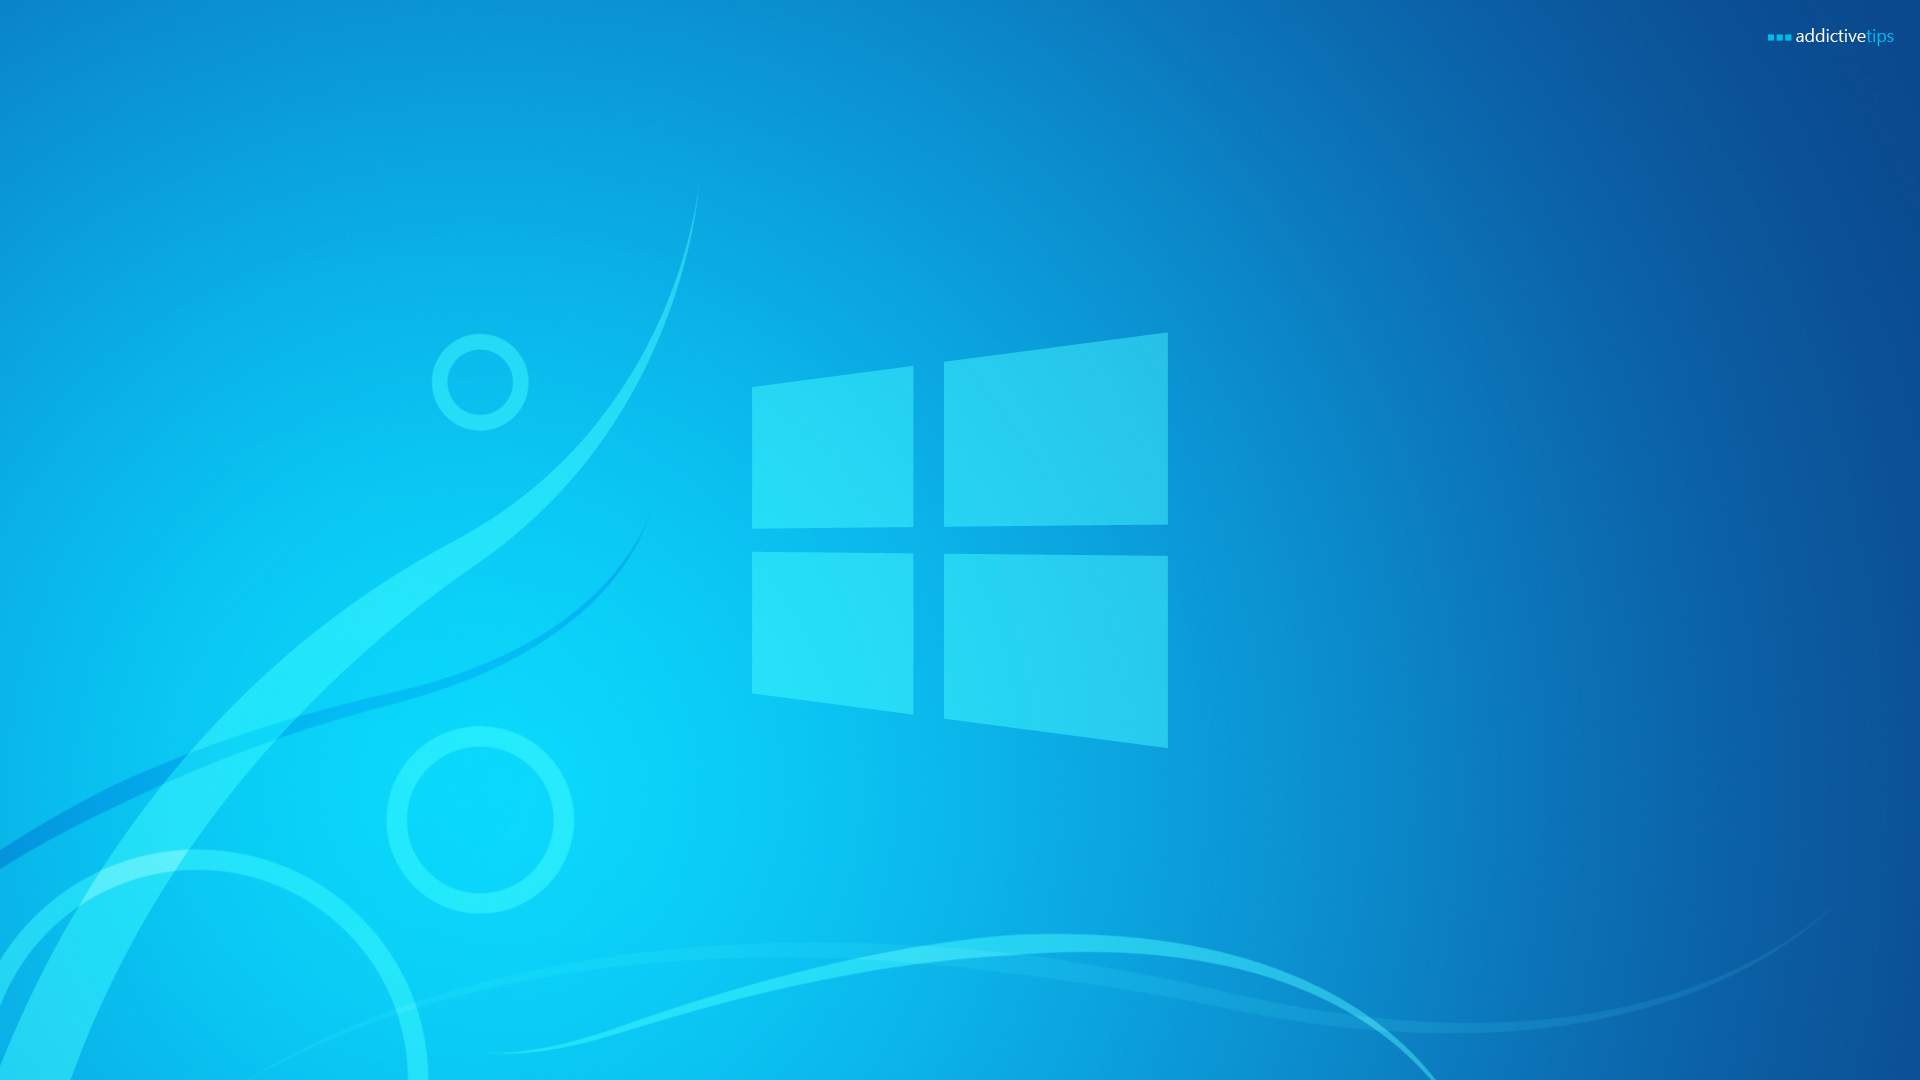 window 8 themes for windows 7 ultimate free download